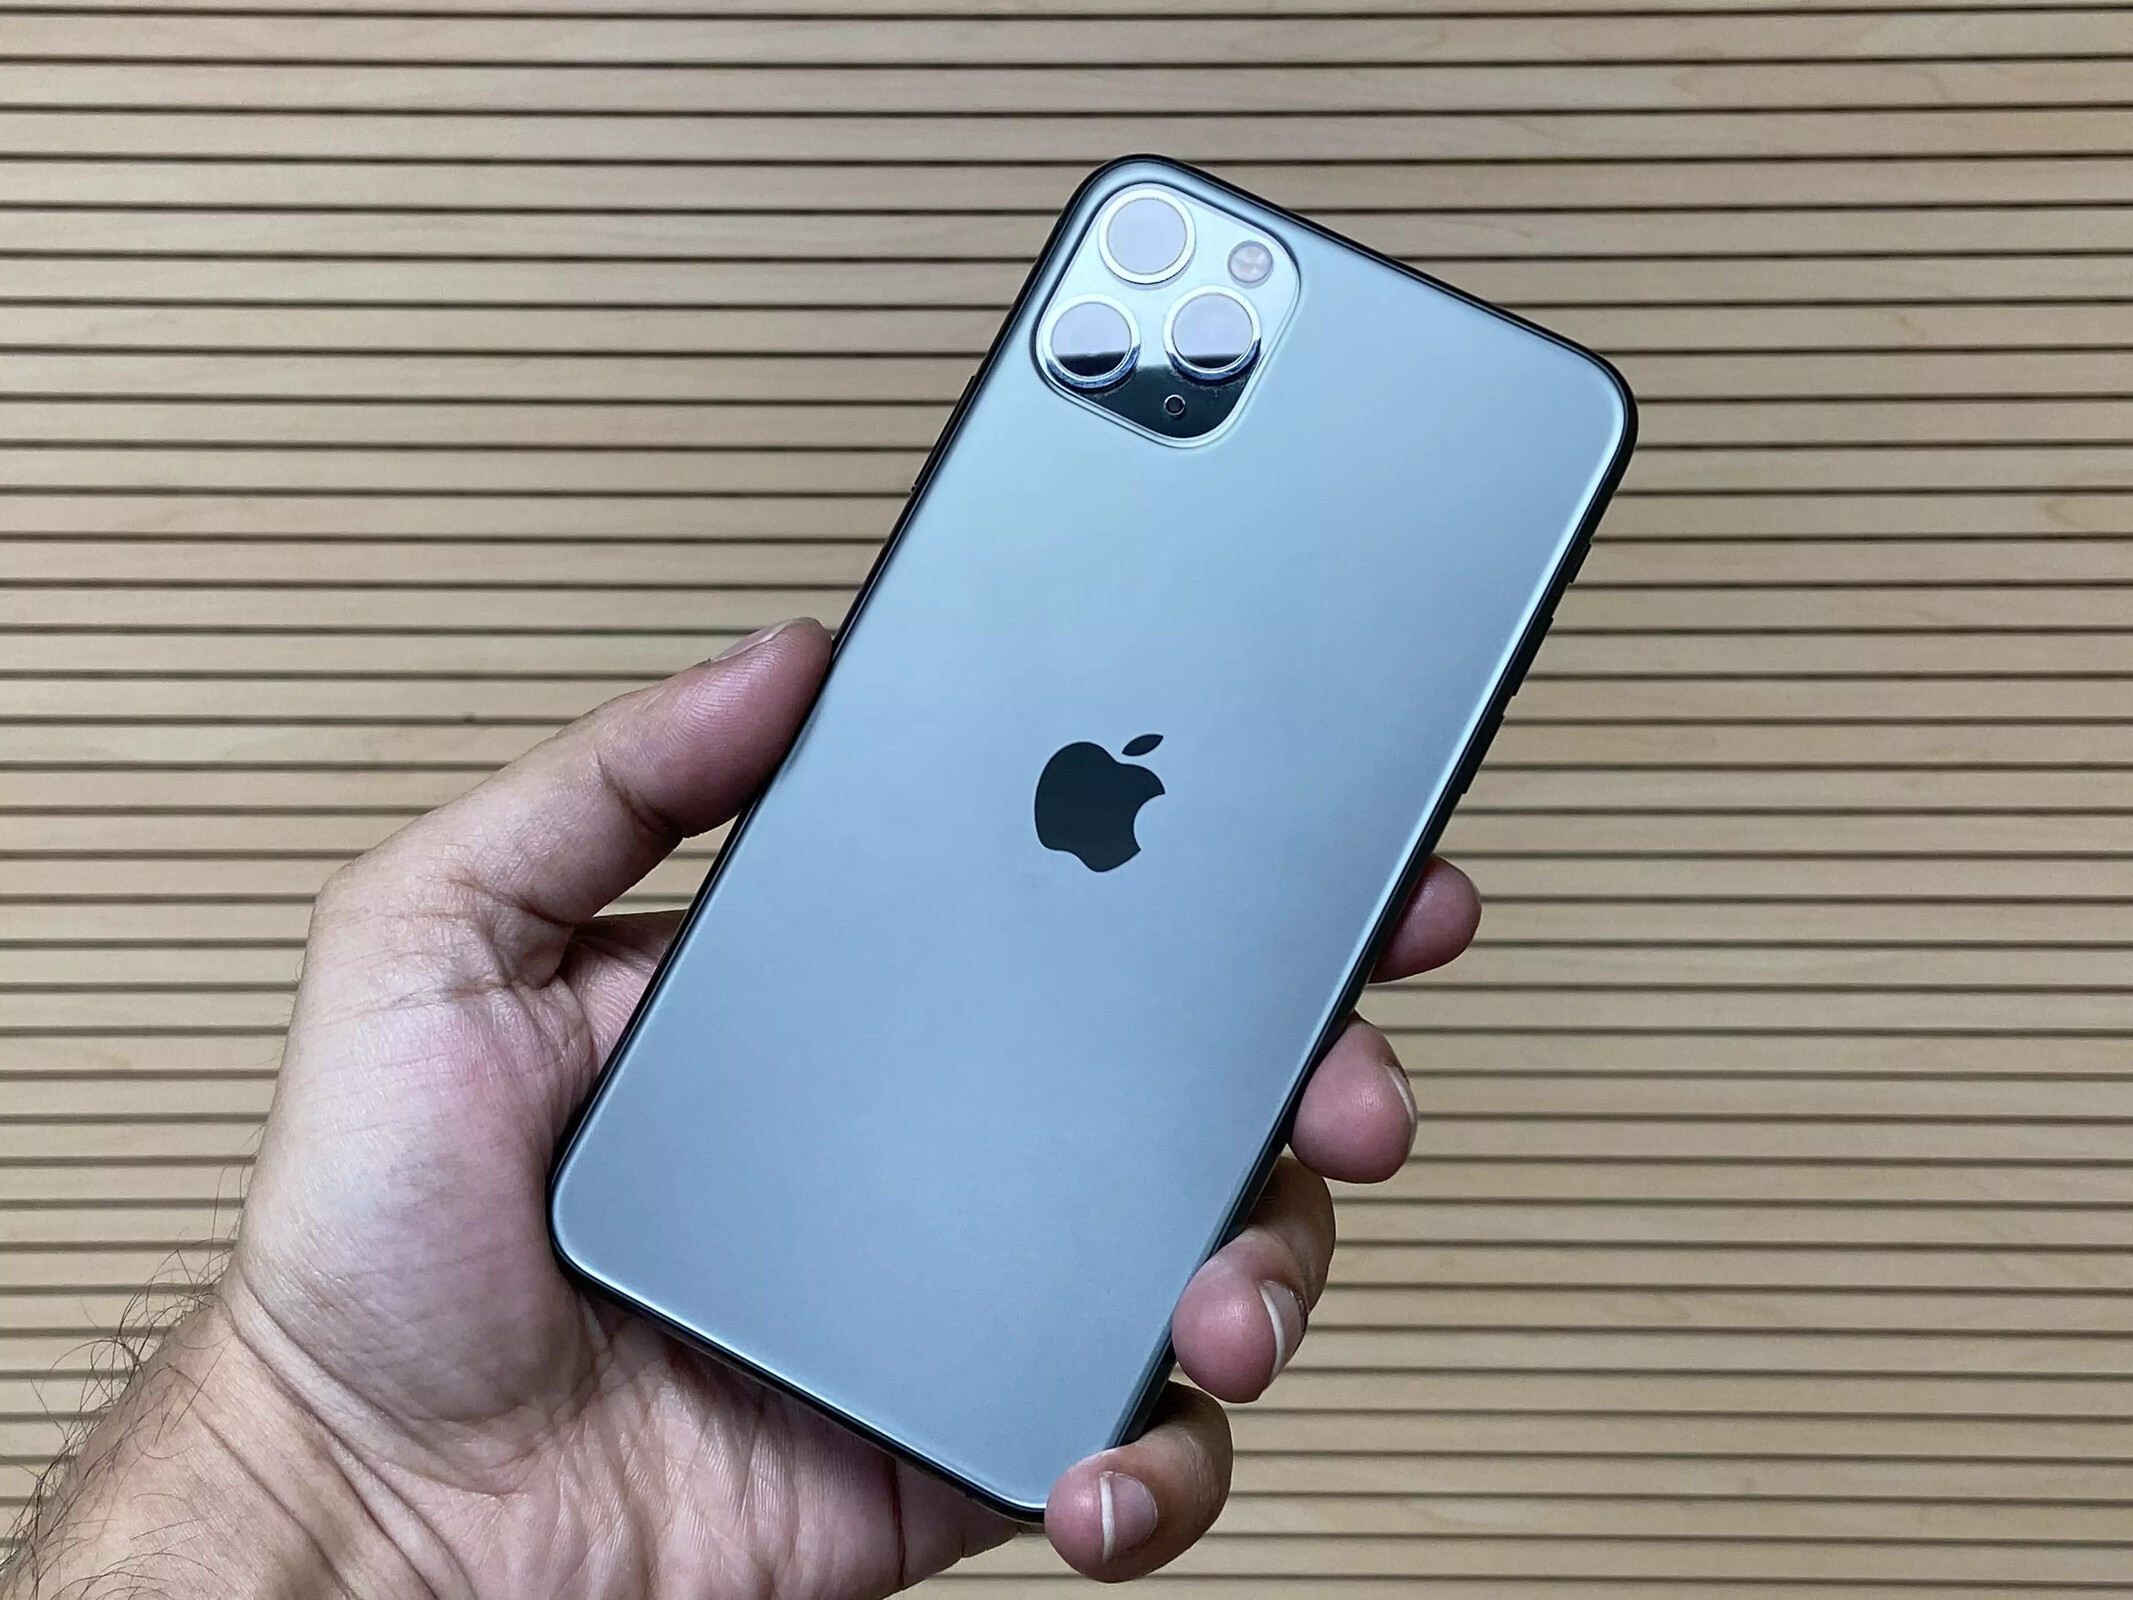 Some iPhone 11 Pro series units may be suffering from a green tint